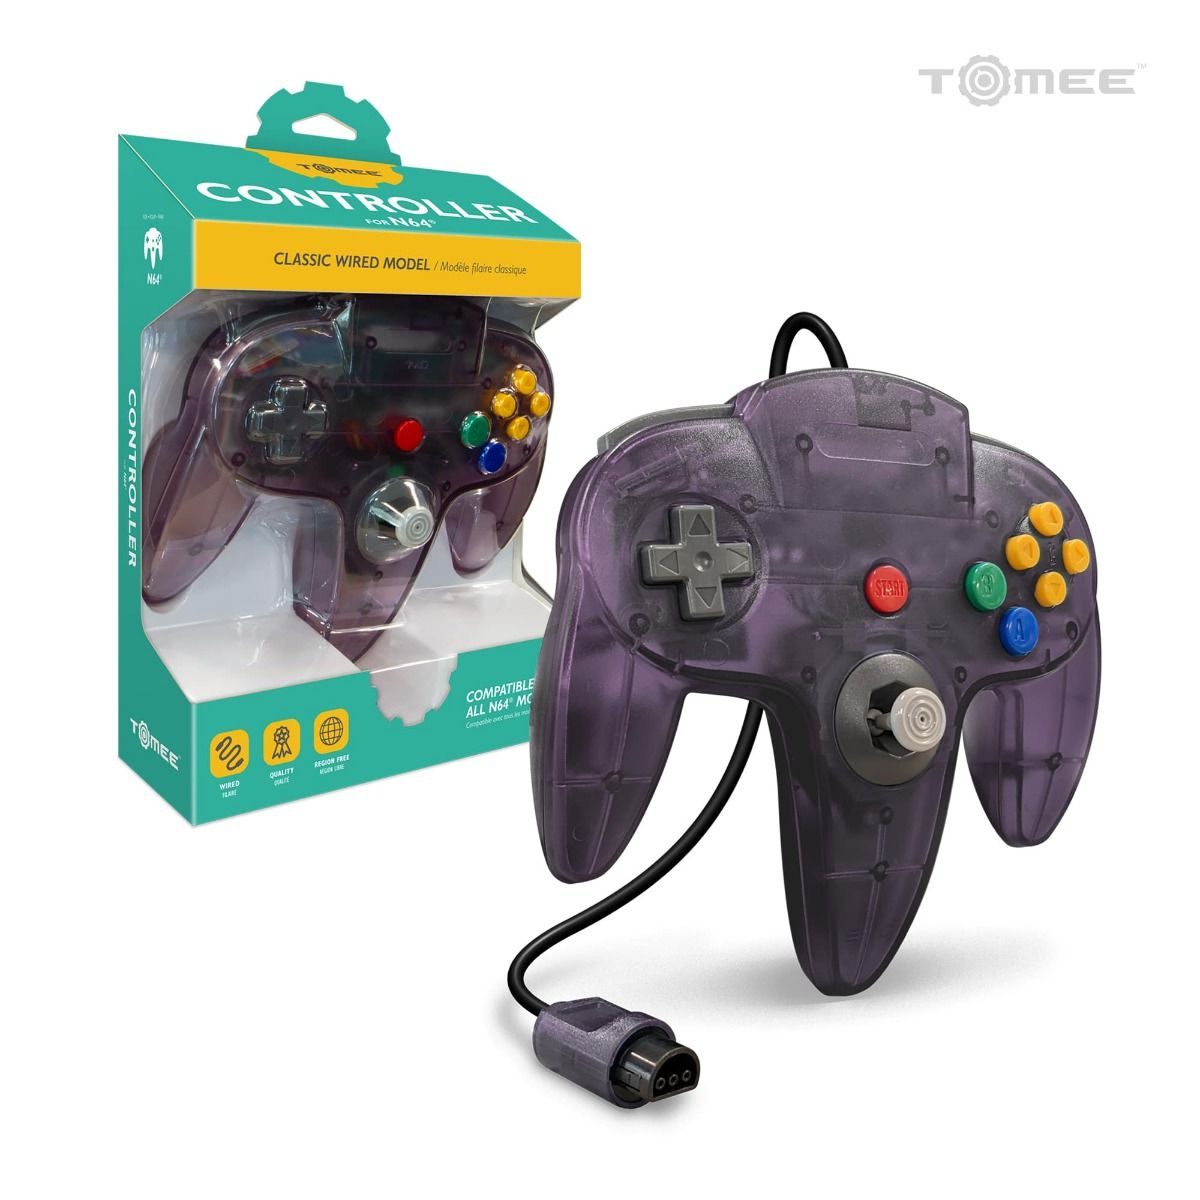 N64 - Tomee Brand Controller Grey - Brand New